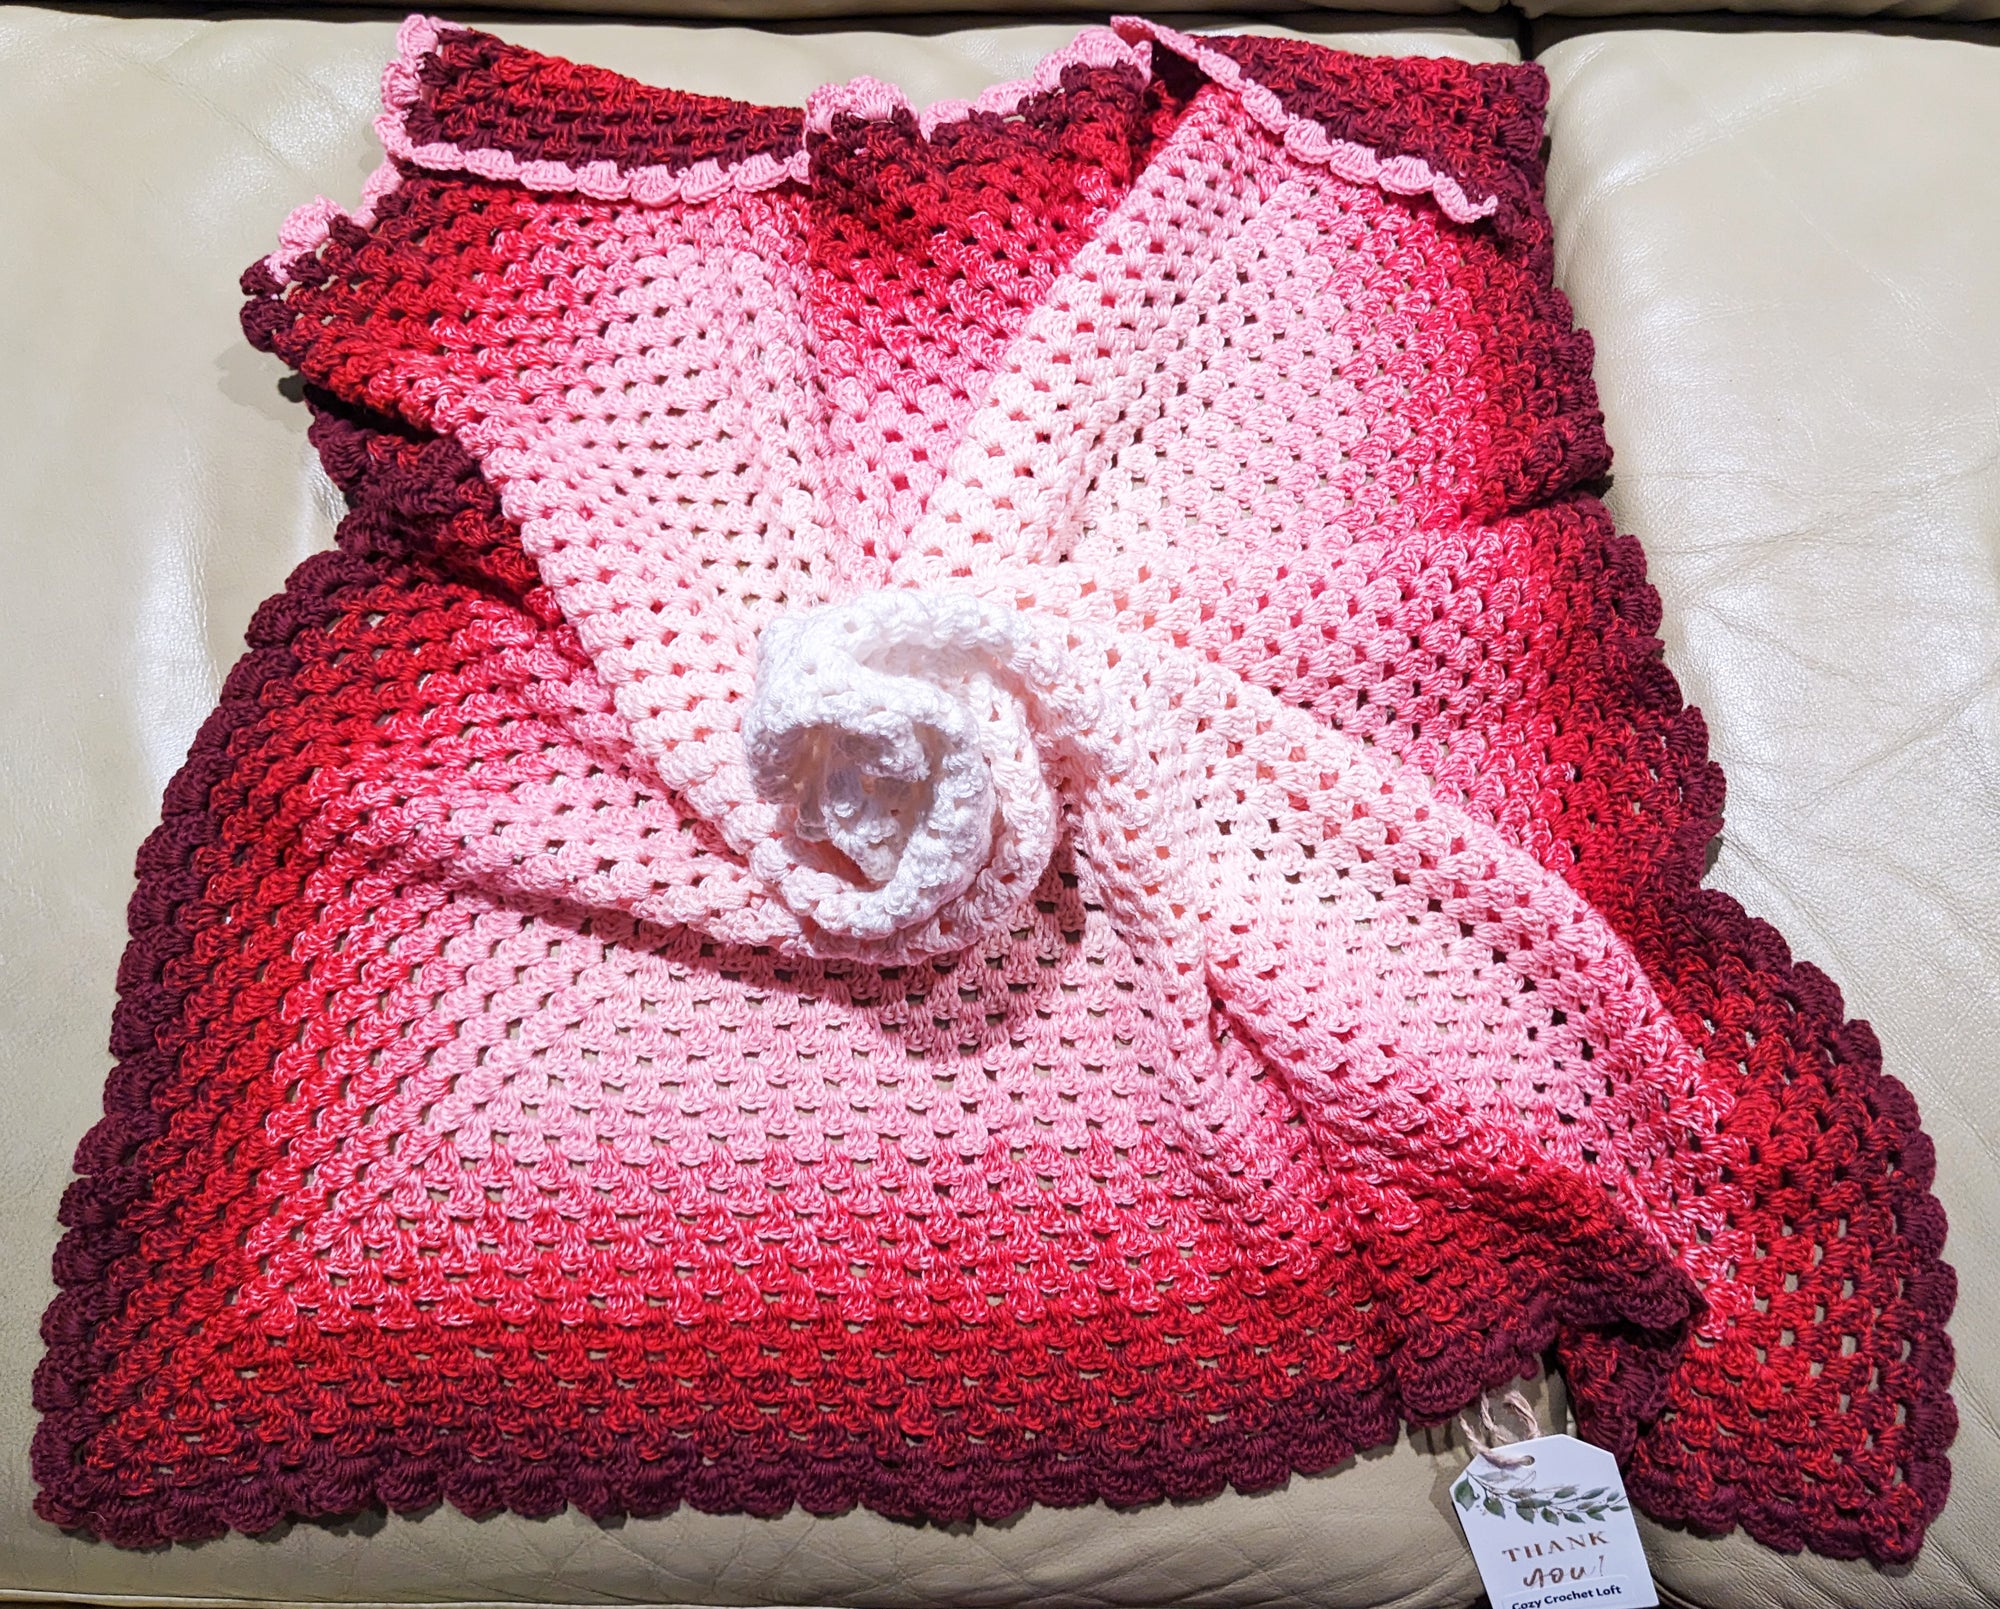 Handmade Crochet Baby Bed Decorative Cover - 31 x 31 inches - 55% Cotton, 45% Pac Yarn- one of a kind